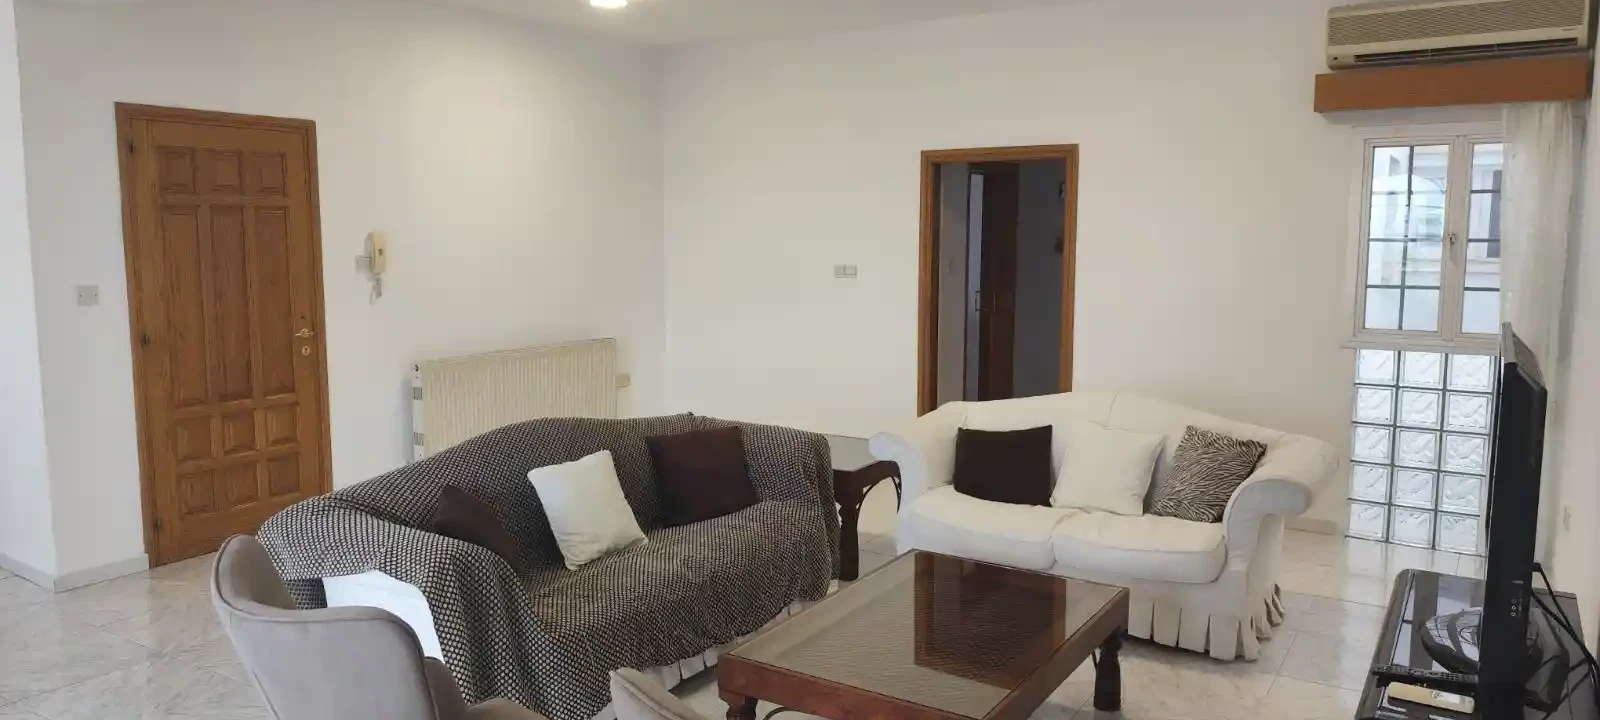 3-bedroom apartment to rent €1.400, image 1